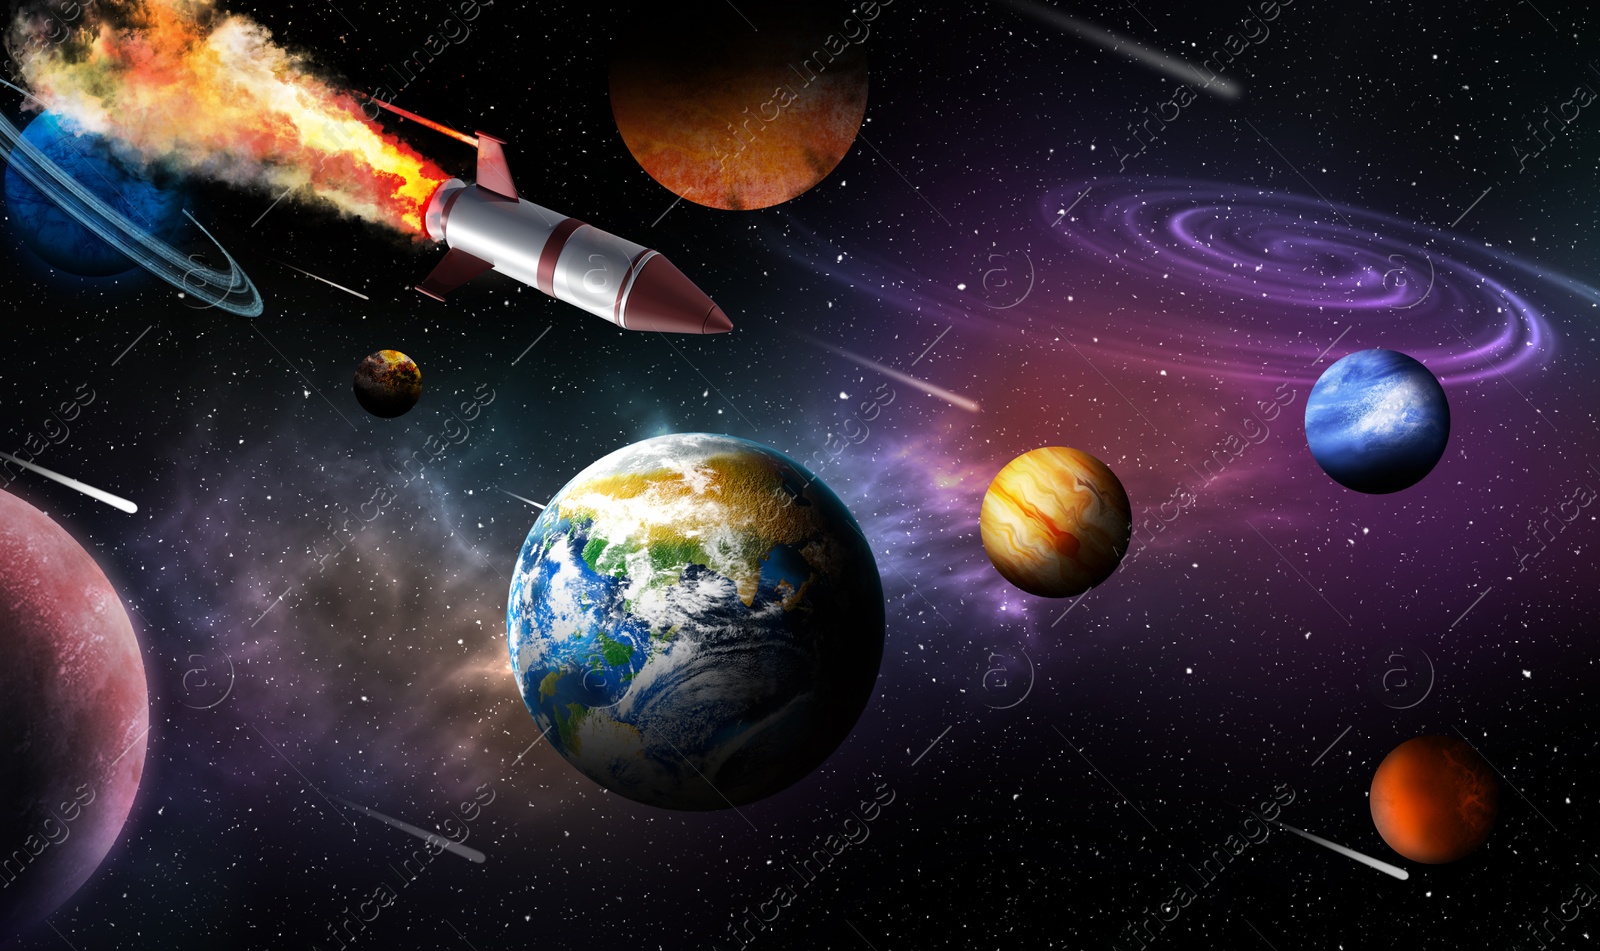 Image of Rocket, planets and galaxy in deep space, banner design